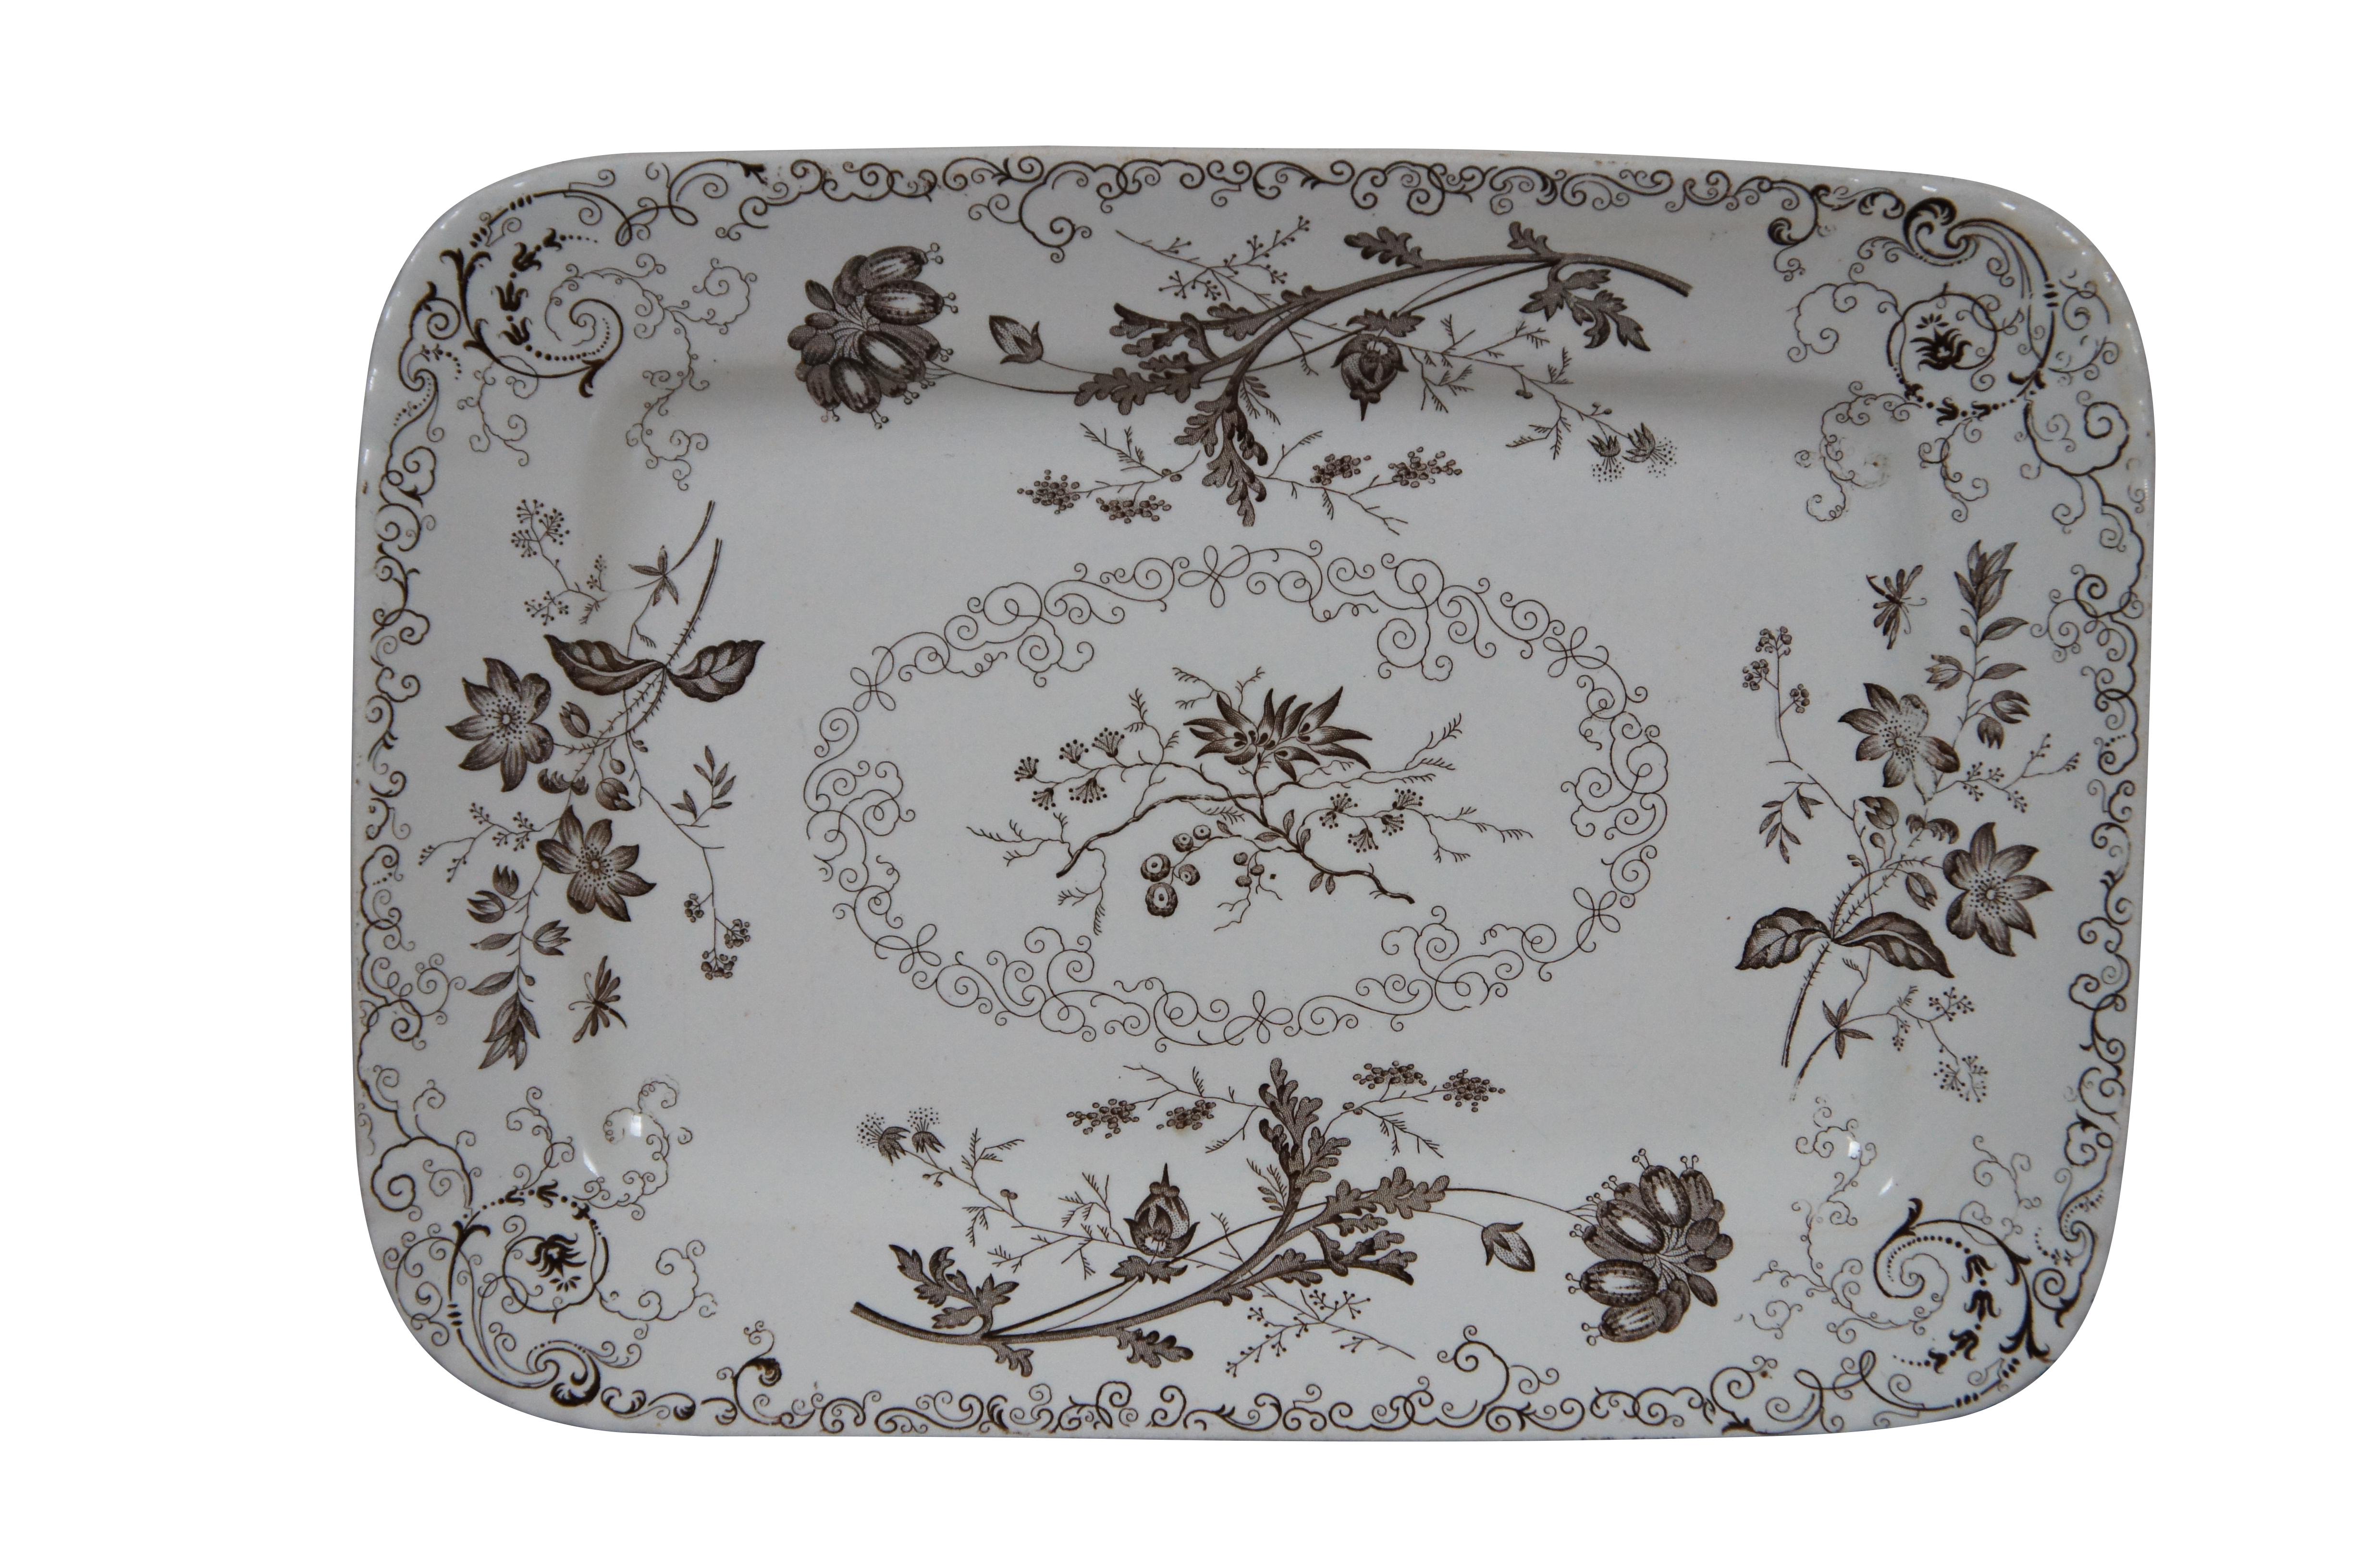 Victorian 2 Antique 19thC English Transferware Platters T&R Boote Lahore PB&S Chelsea For Sale